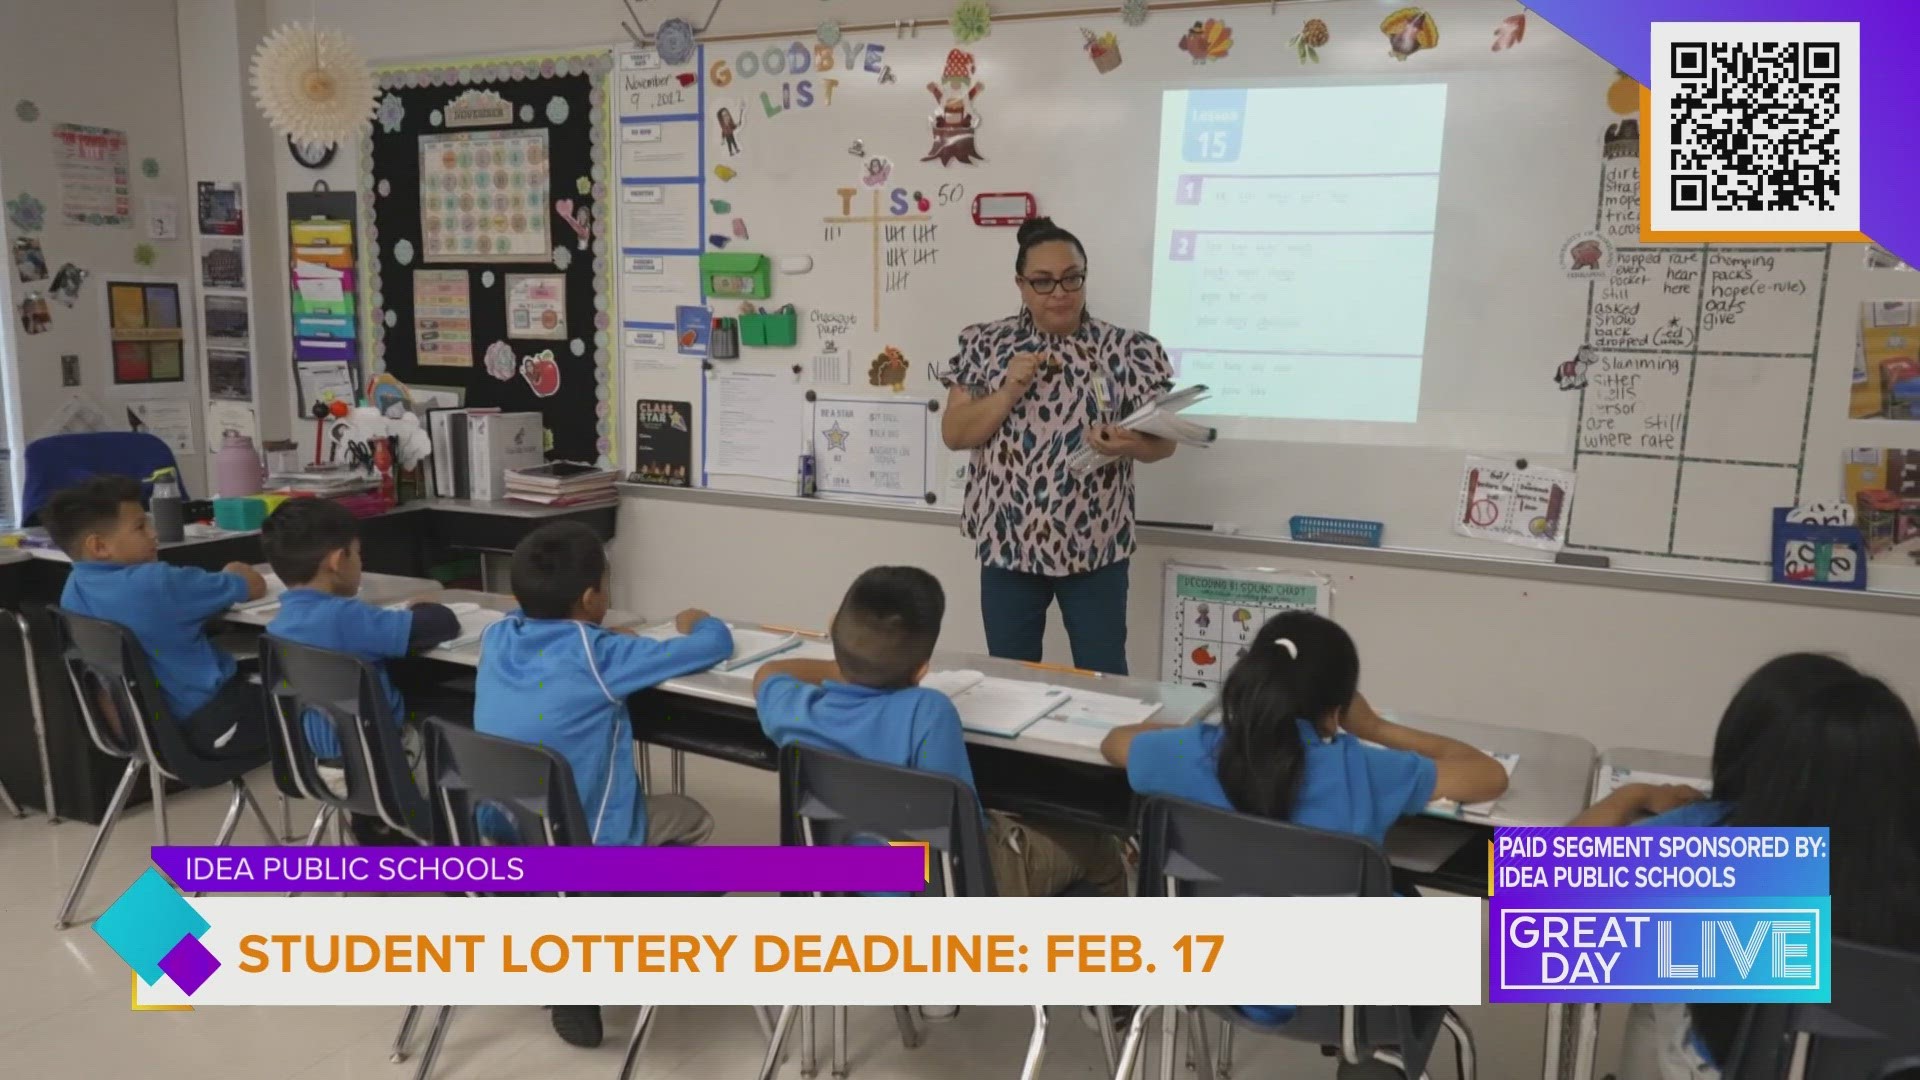 This story sponsored by: Idea Public Schools. Idea Public Schools is opening a new campus in Lakeland. The deadline to apply for the student lottery is February 17th